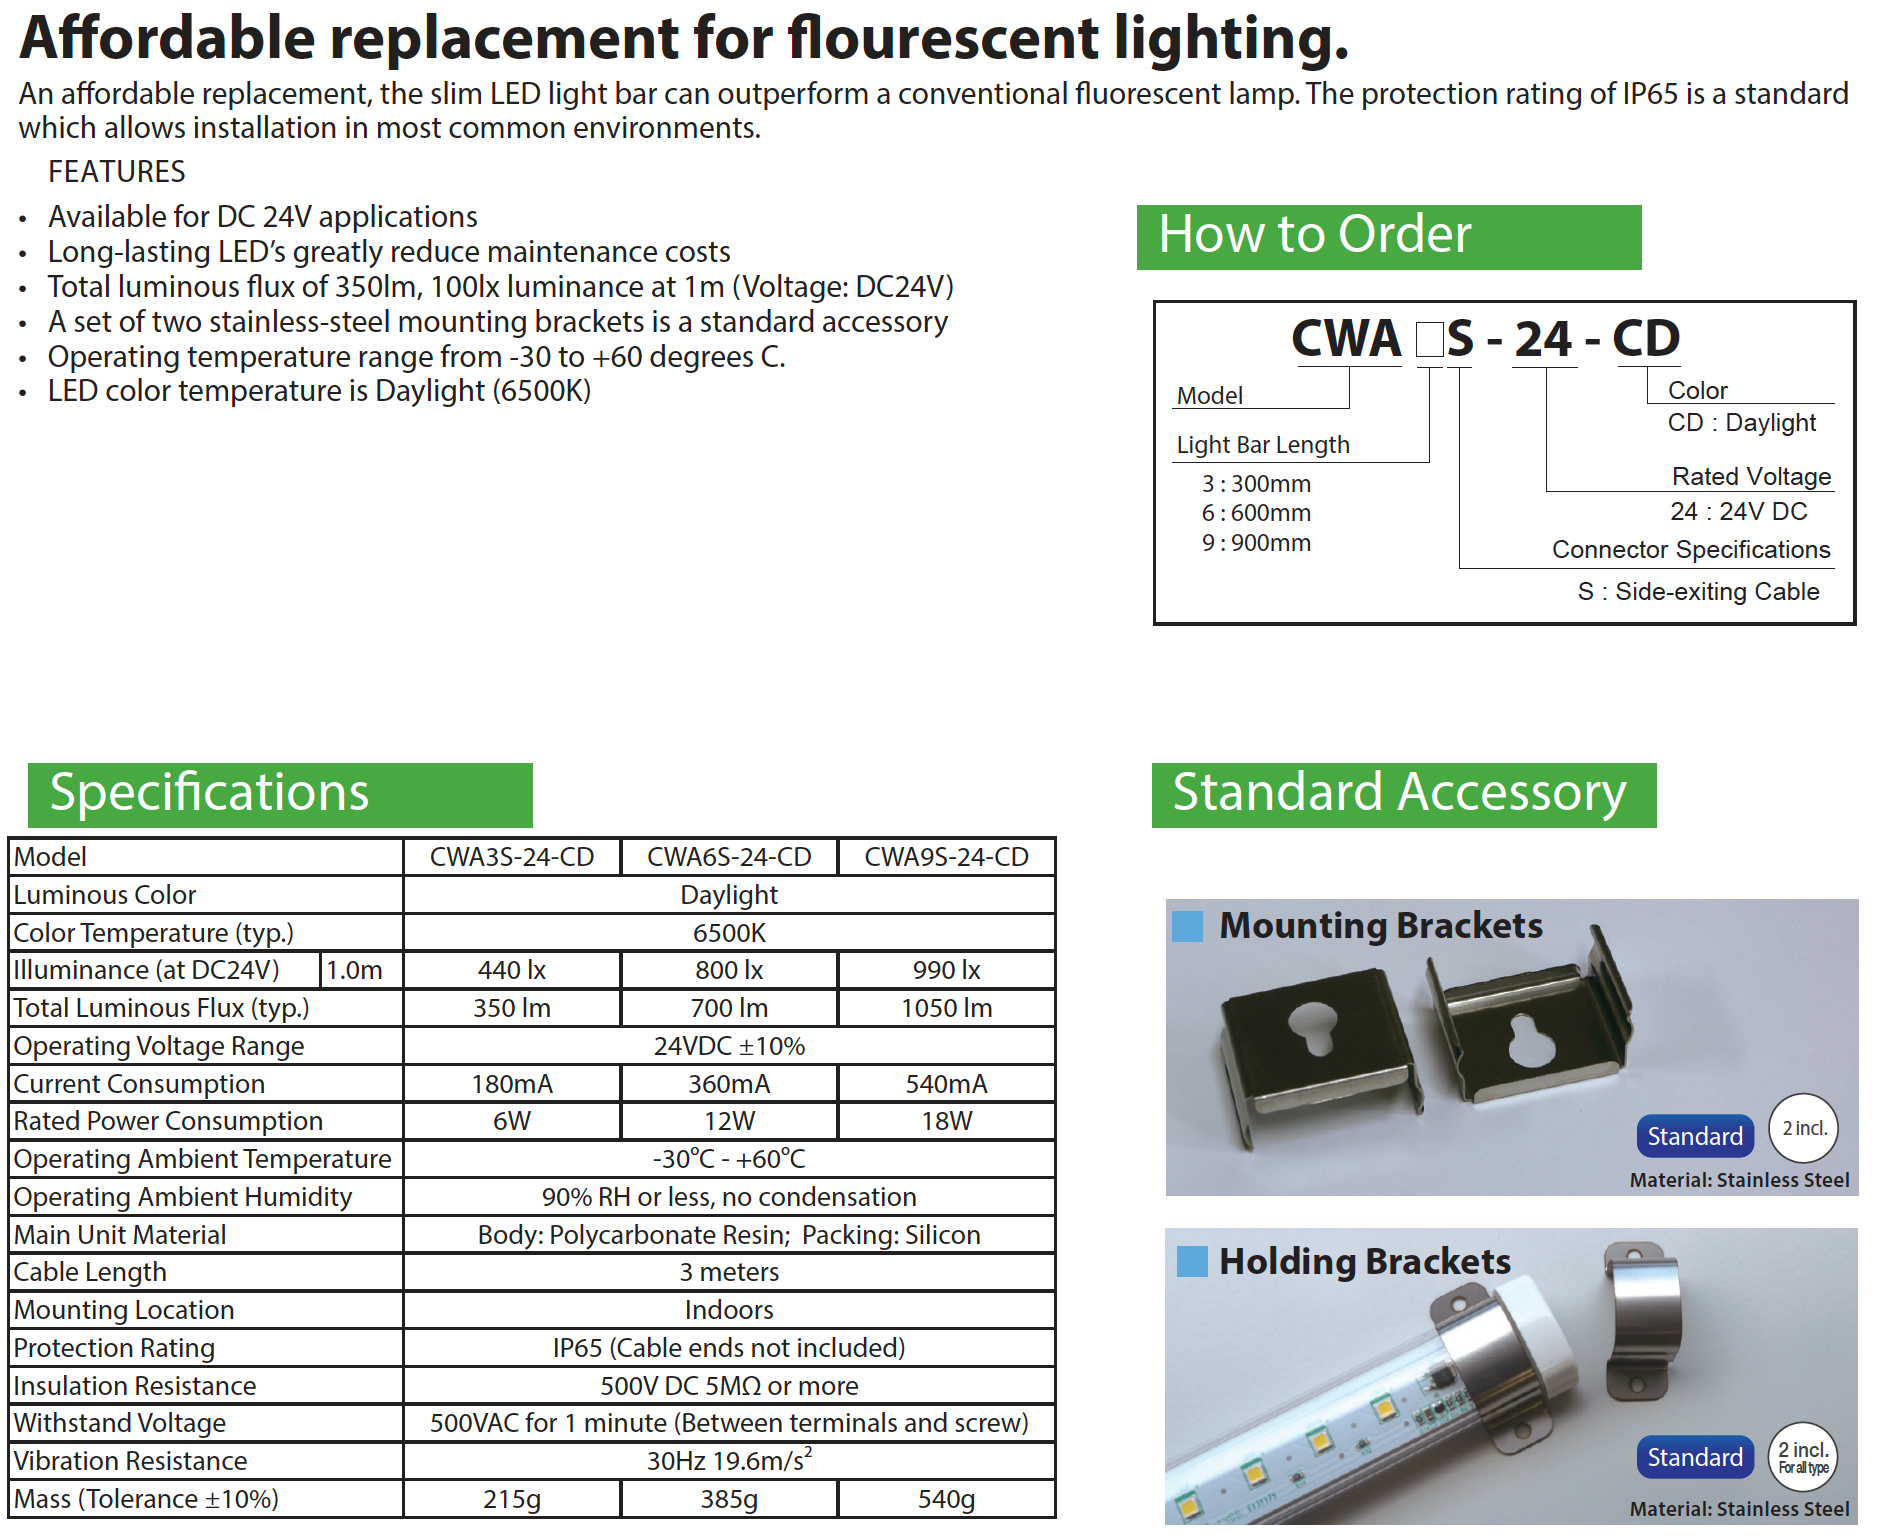  PATLITE SIGNALFX CWA IP65 LED Lighting for CNC Food & Beverage Cabinet Industrial Commercial Aviation CWA3S CWA6S CWA9S -CD